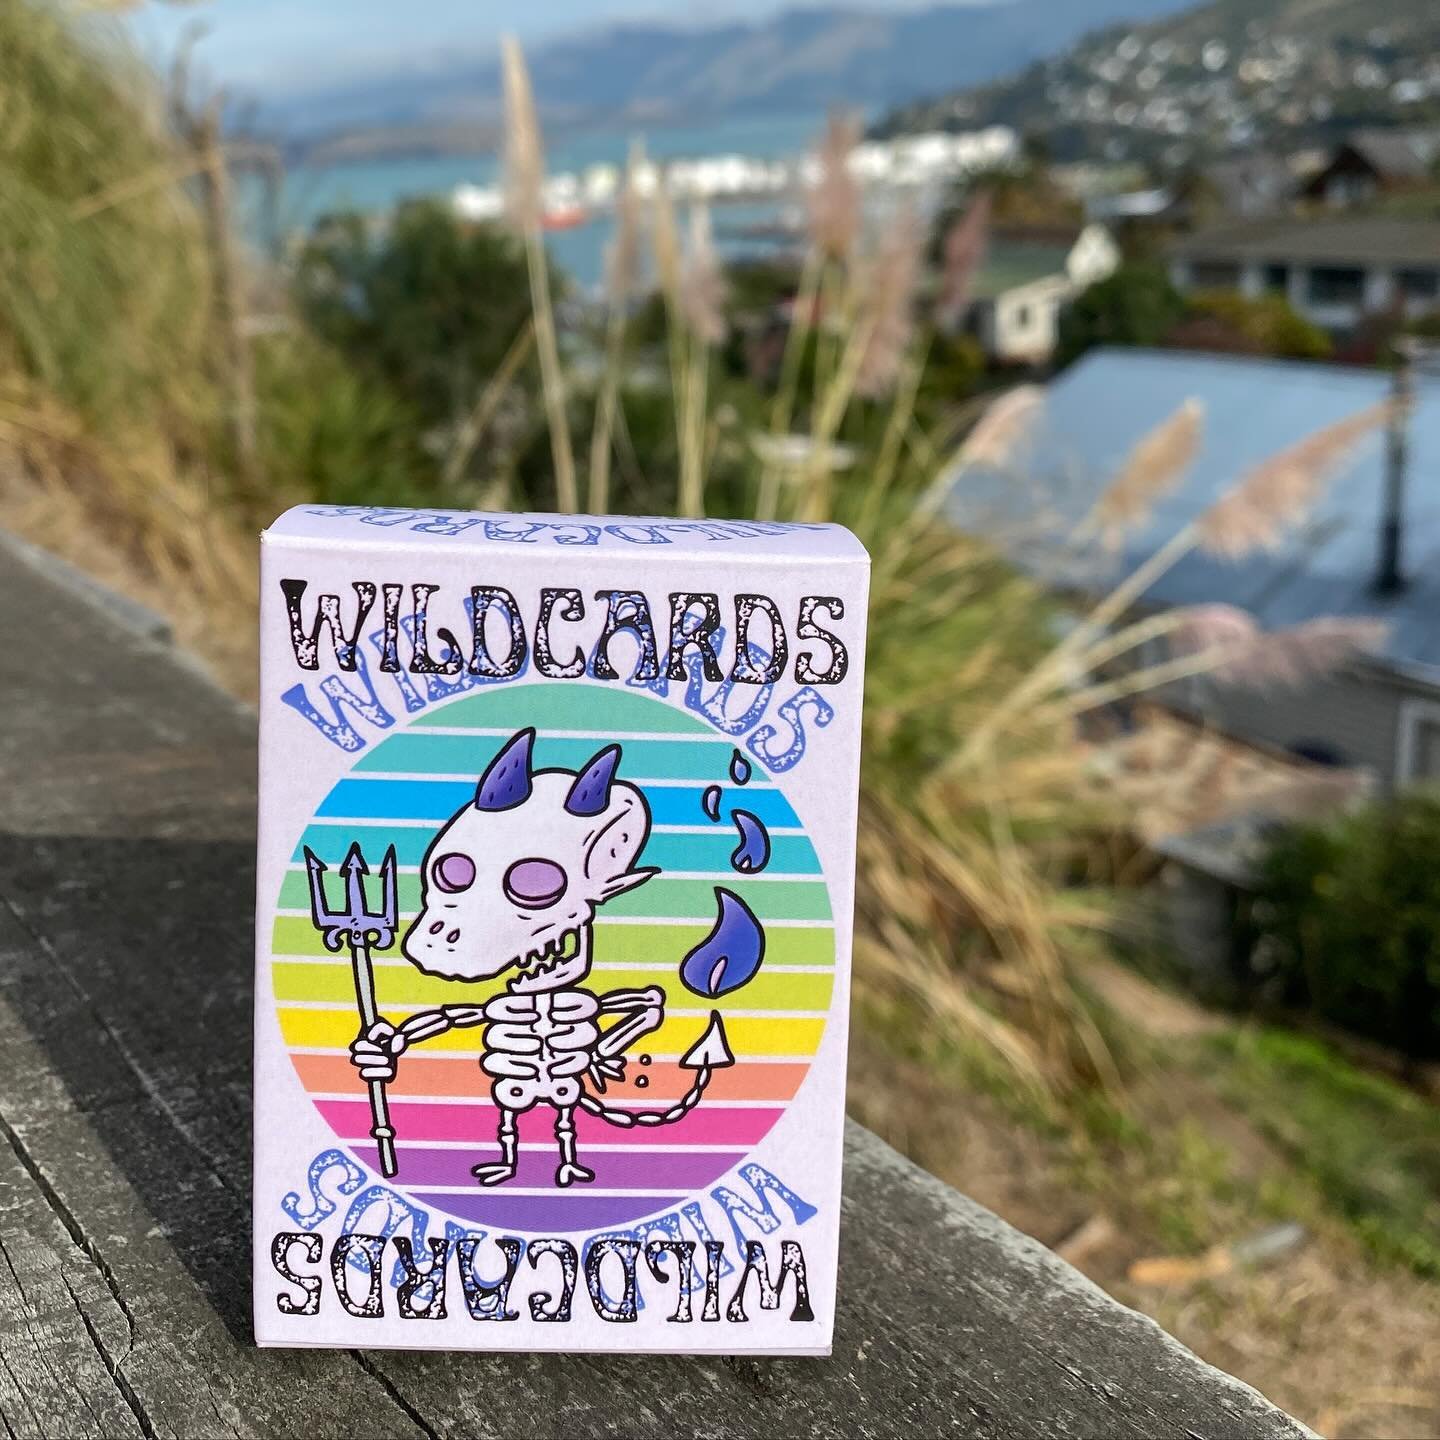 Woot! We are the proud new owners of a deck of Lyttelton designed and created @worldwildcards!
5 suits, epic art, crazy wild cards to make up new games with - and a world of good and weird possibilities.

Purchase a pack and #supportlocal by going to